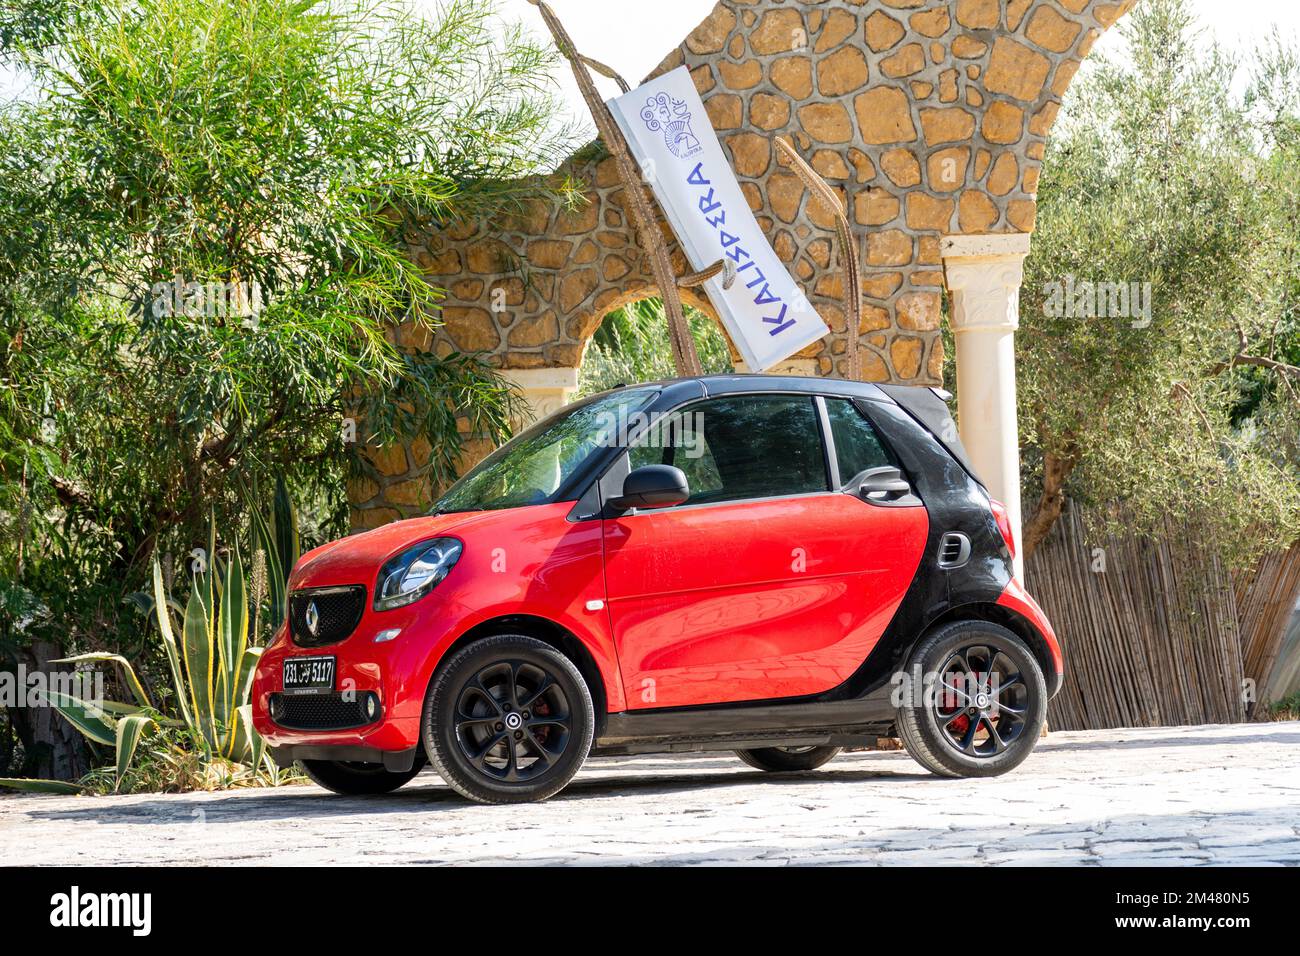 SMART FORTWO CABRIO smart-fortwo-453-brabus Used - the parking